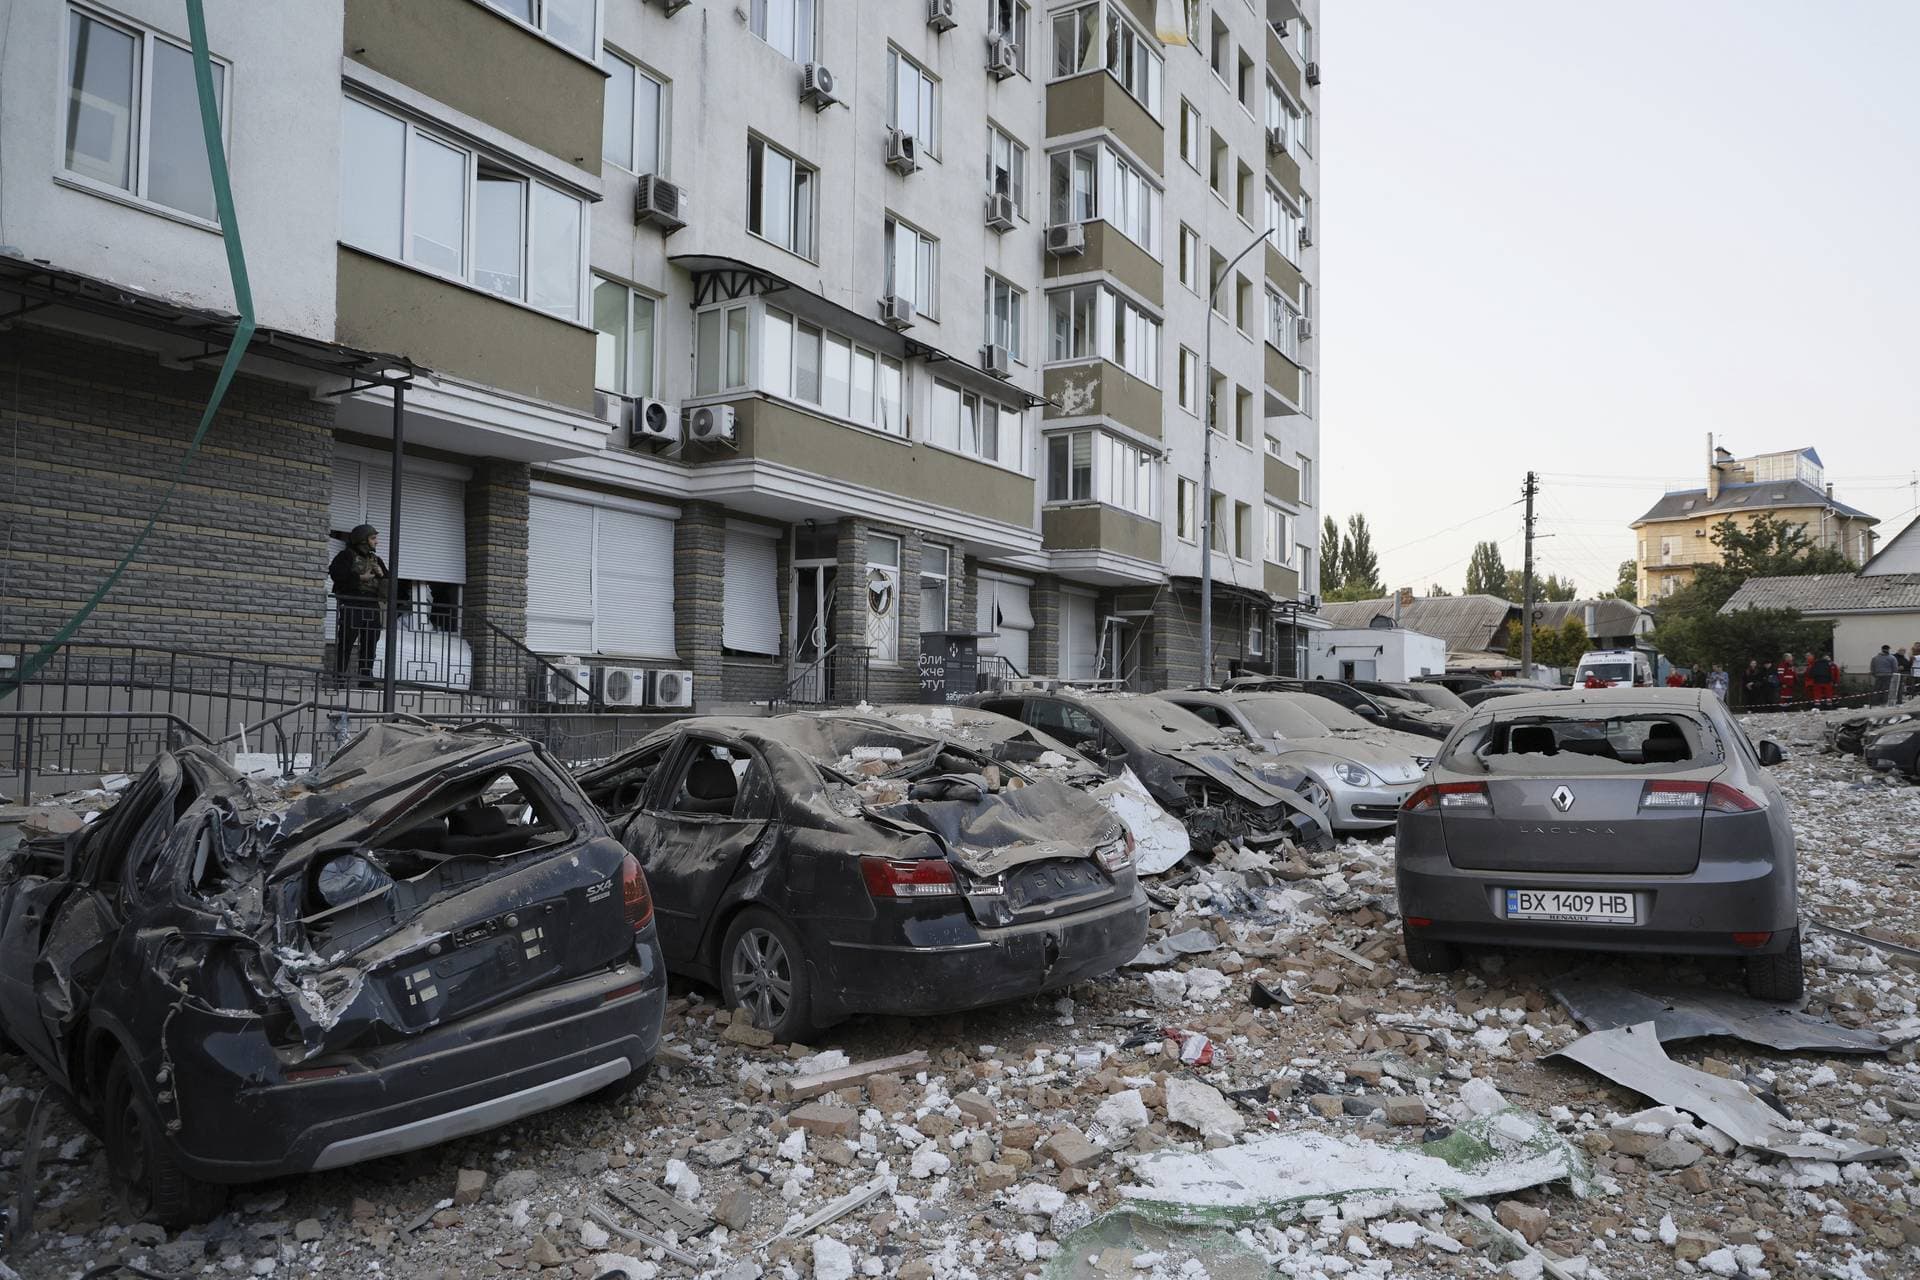 Damaged cars are parked in the yard of a multi-story apartment building which was damaged in a relentless wave of bombardments targeting in Kyiv